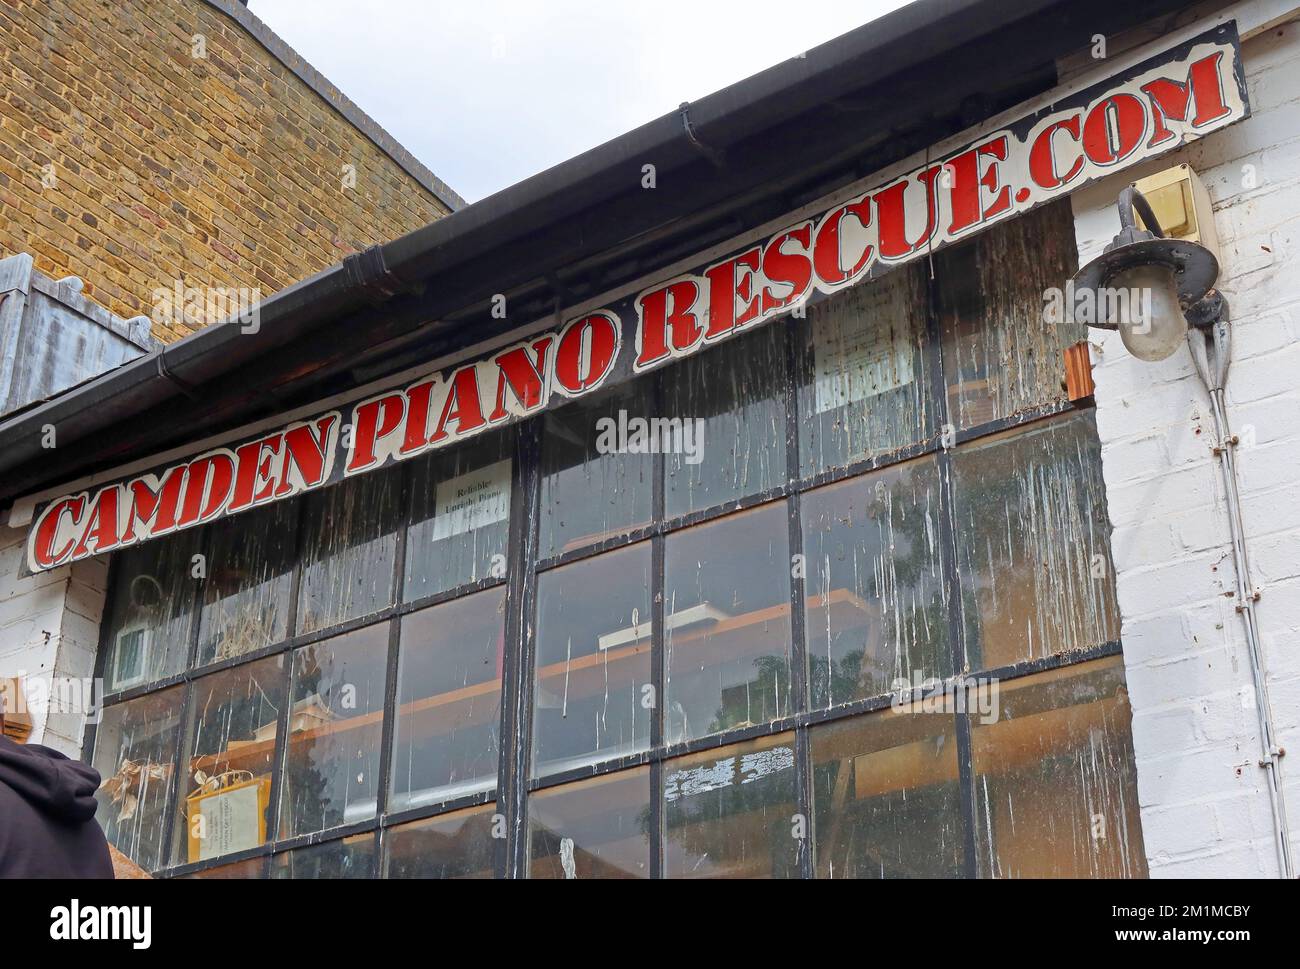 Camden Piano Rescue shop, Camden Lock, Londres, Angleterre, Royaume-Uni Banque D'Images